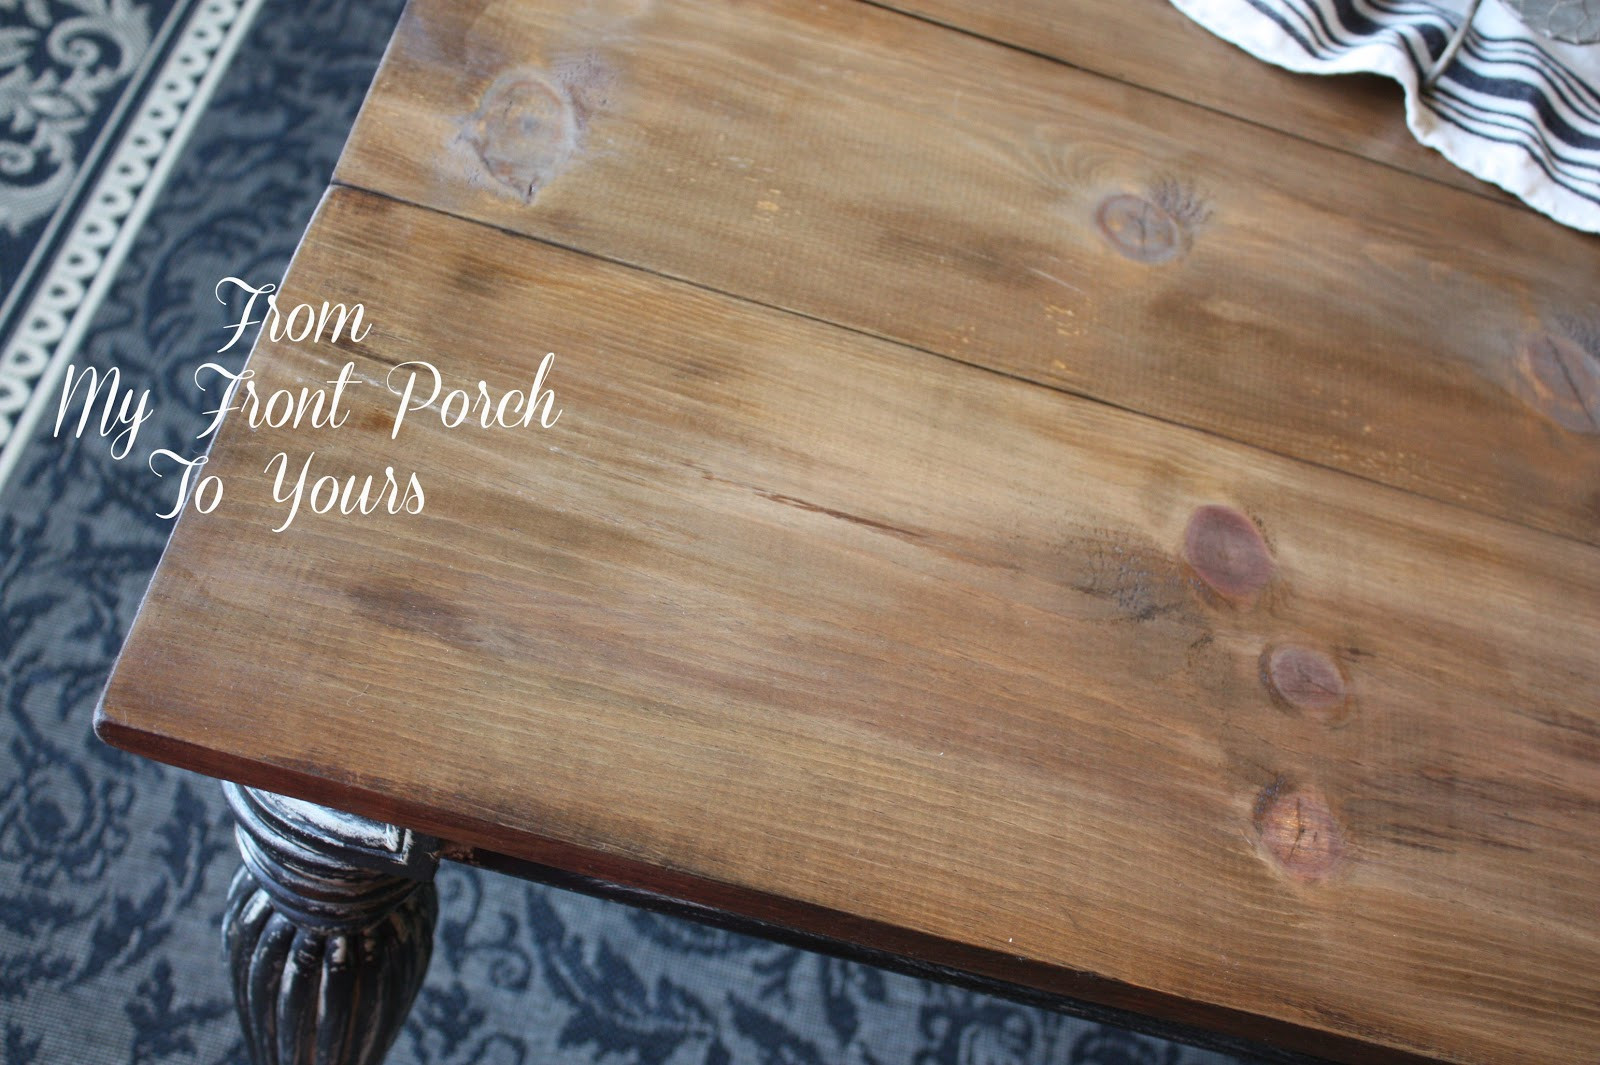 DIY Table Top Wood
 From My Front Porch To Yours DIY Wood Plank Table Top Reveal